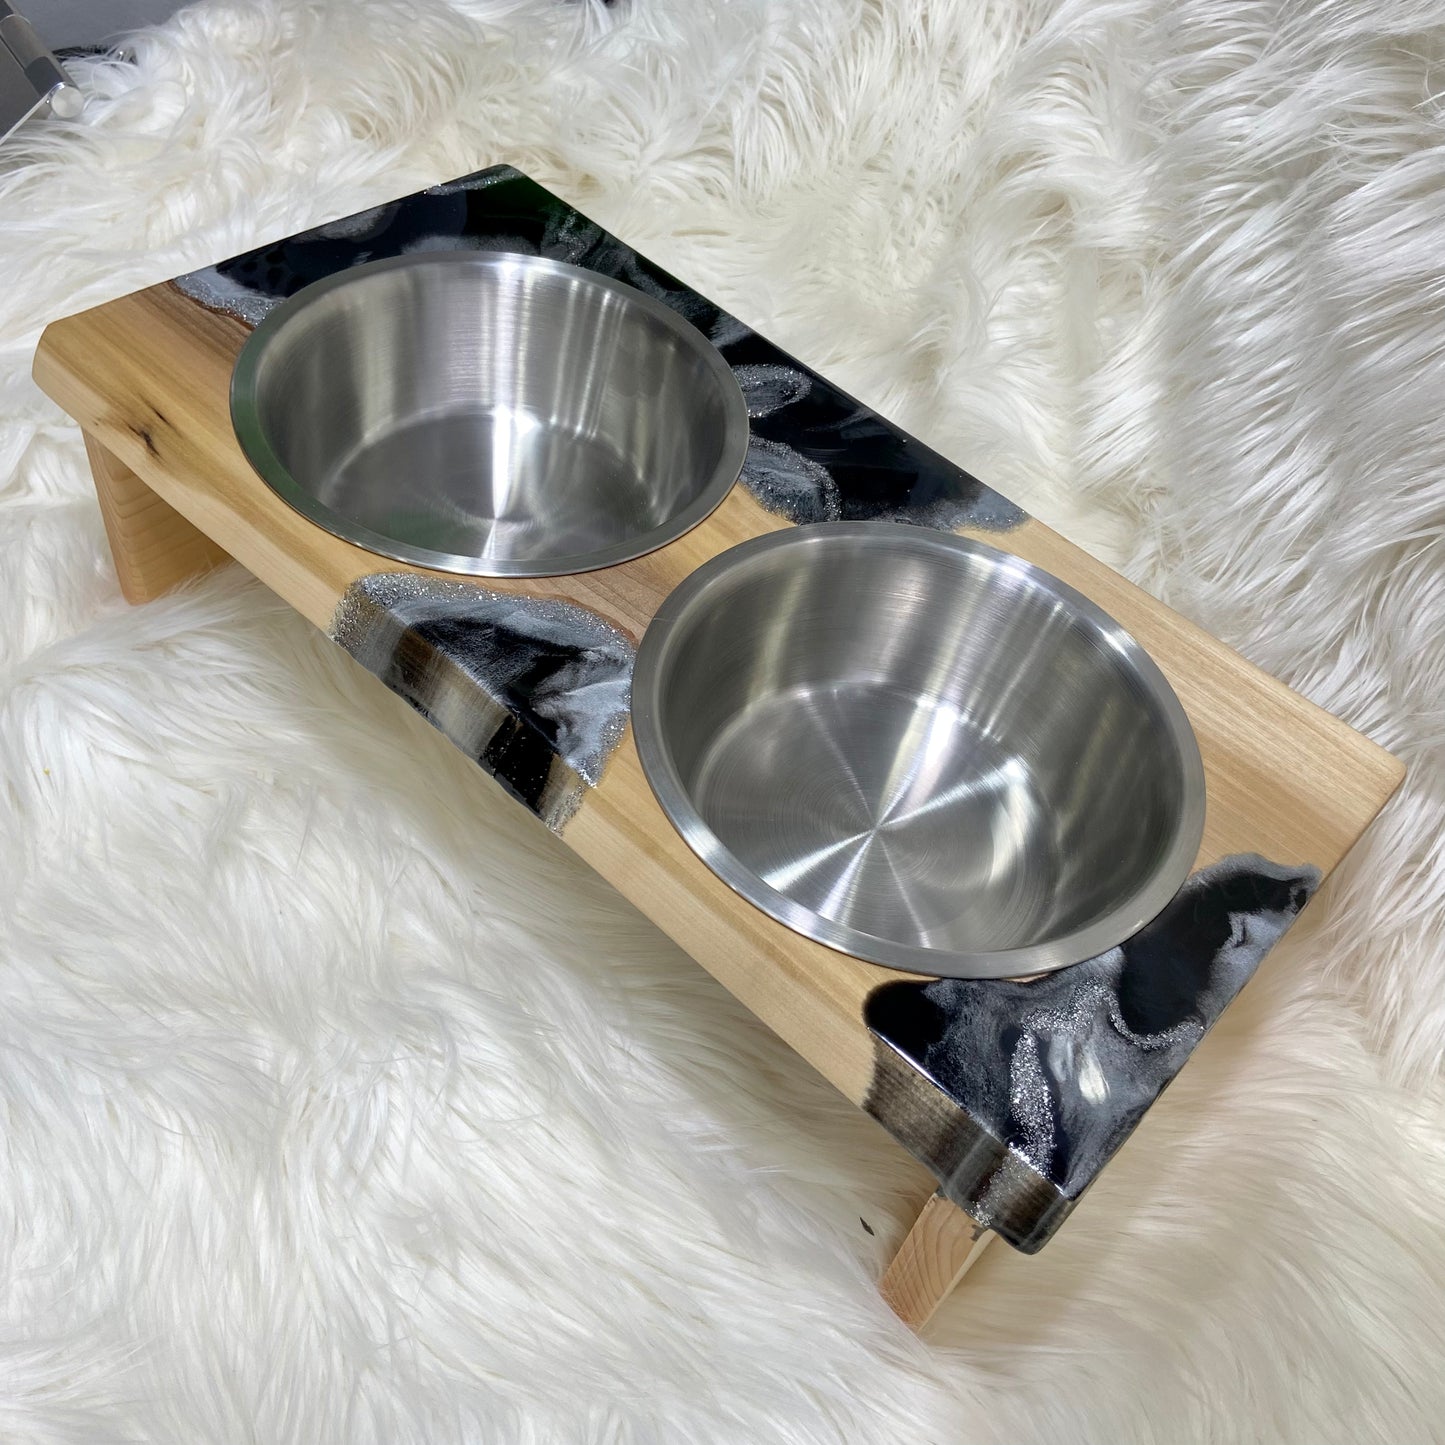 Marble-Style Dog Bowl Stand - Poplar Wood with Black & Silver Resin Art